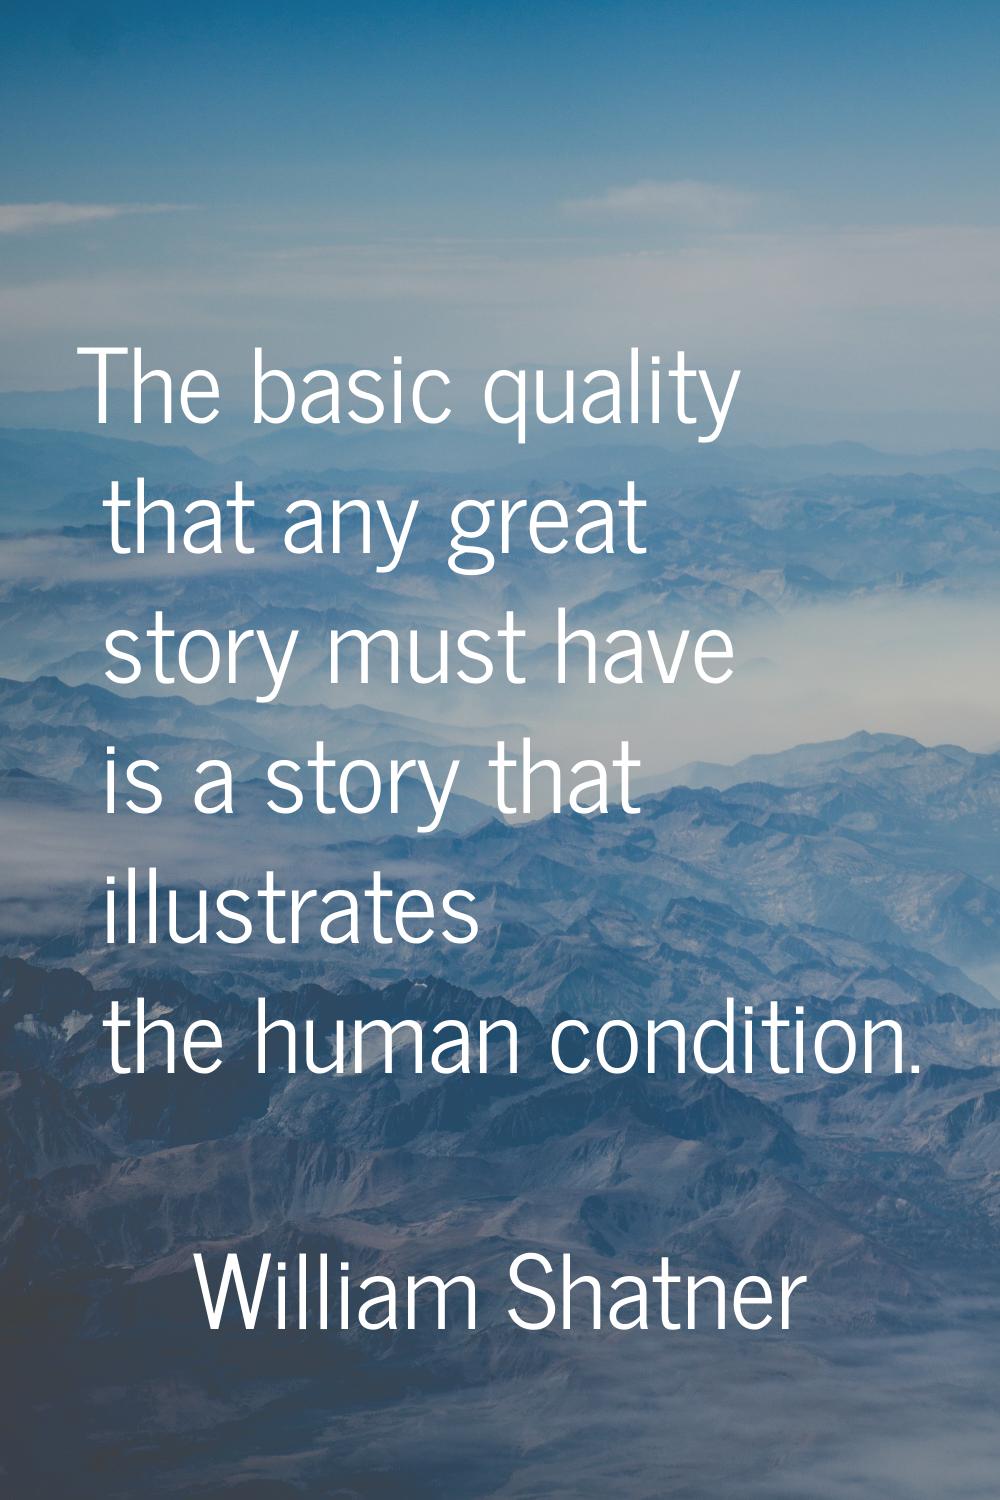 The basic quality that any great story must have is a story that illustrates the human condition.